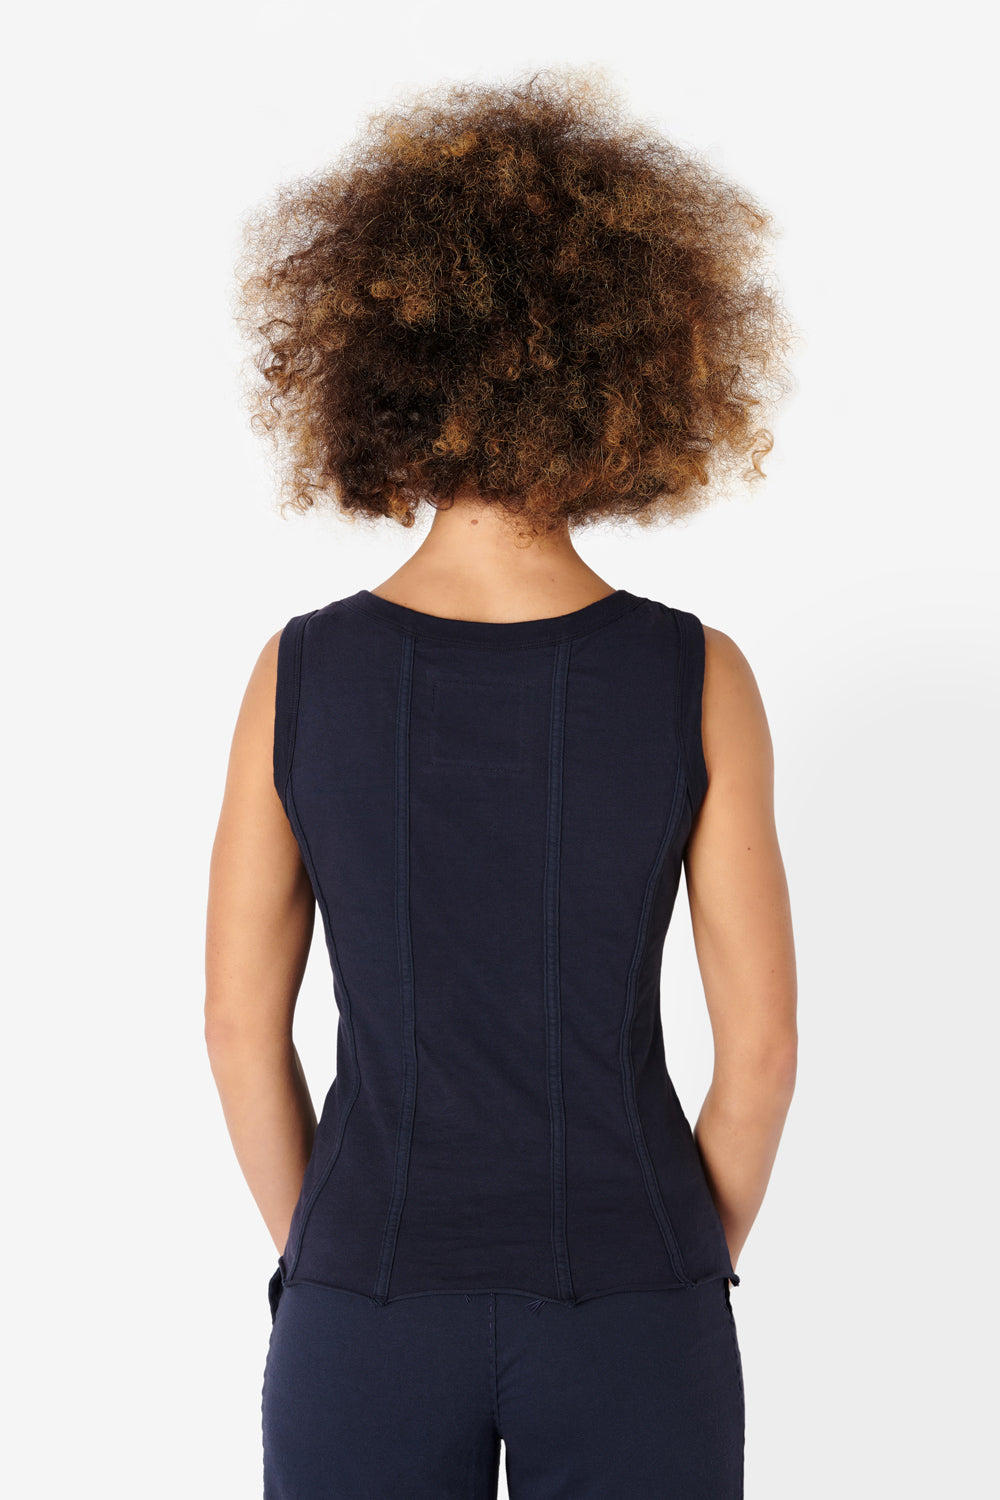 Model wearing The Corset in Navy, shown from the back.